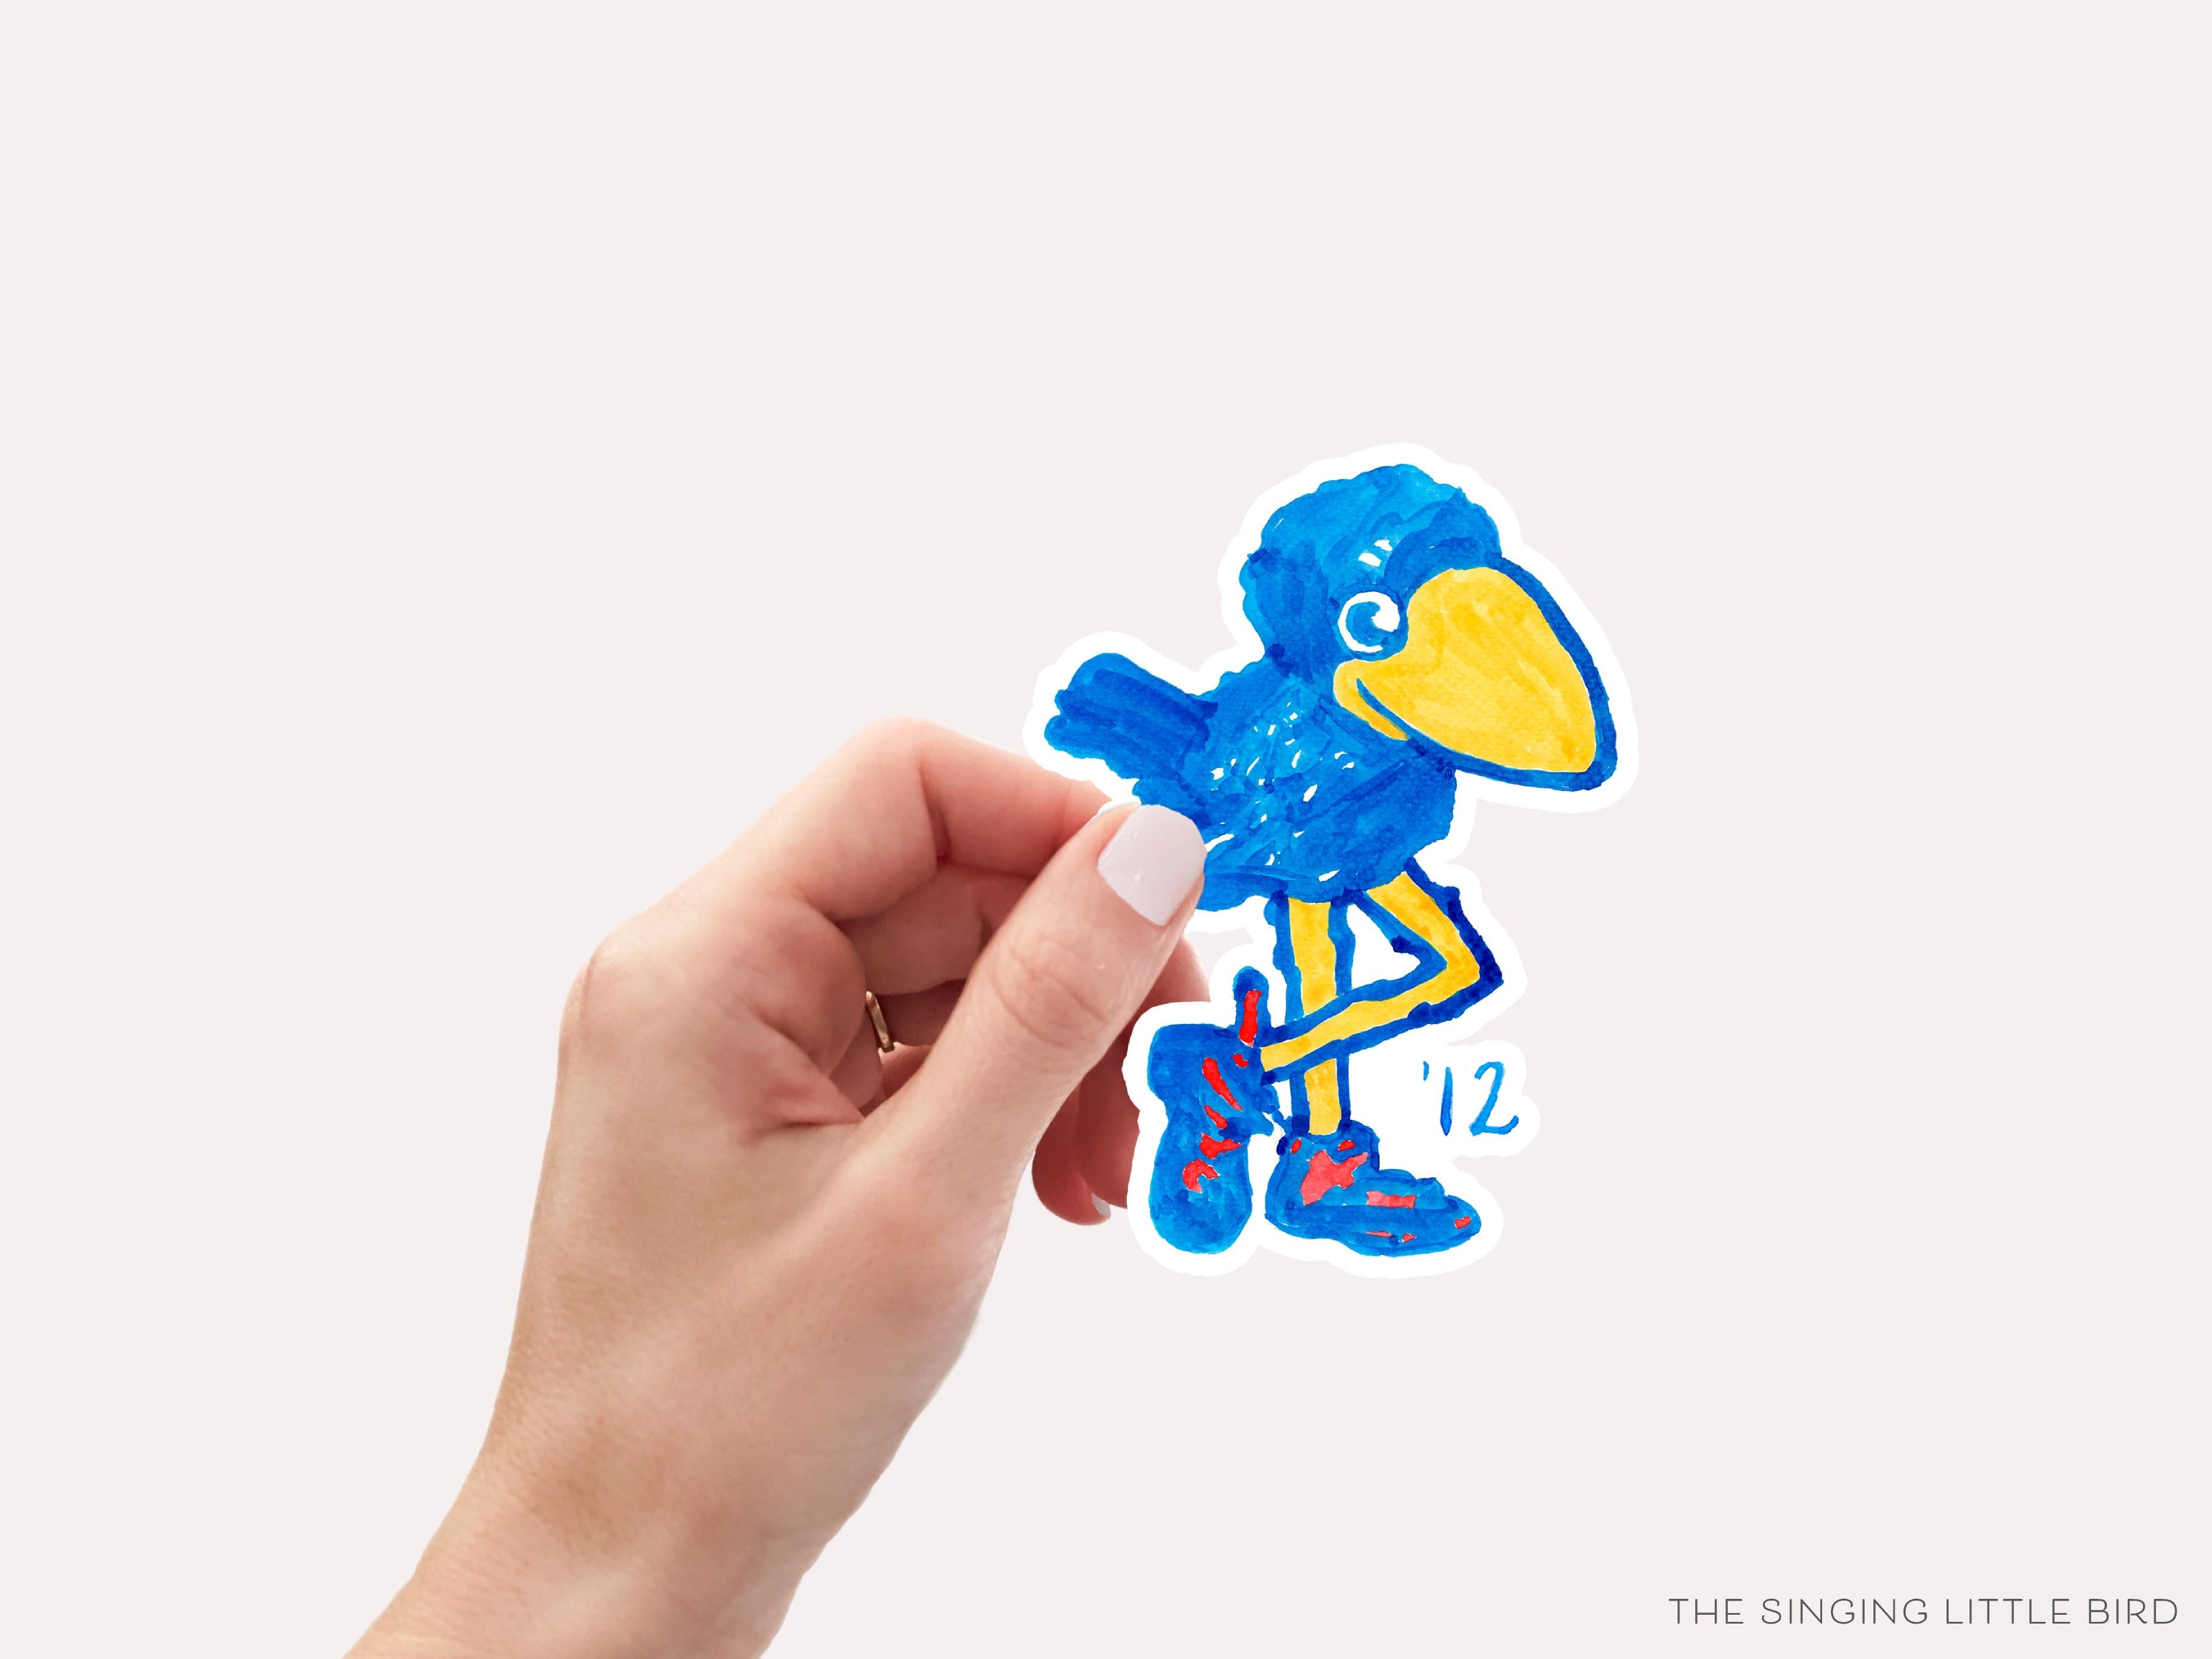 1912 Jayhawk Vinyl Sticker [Officially Licensed]-These weatherproof die cut stickers feature our hand-painted watercolor 1912 Jayhawk, making great laptop or water bottle stickers or gifts for the University of Kansas lover in your life.-The Singing Little Bird